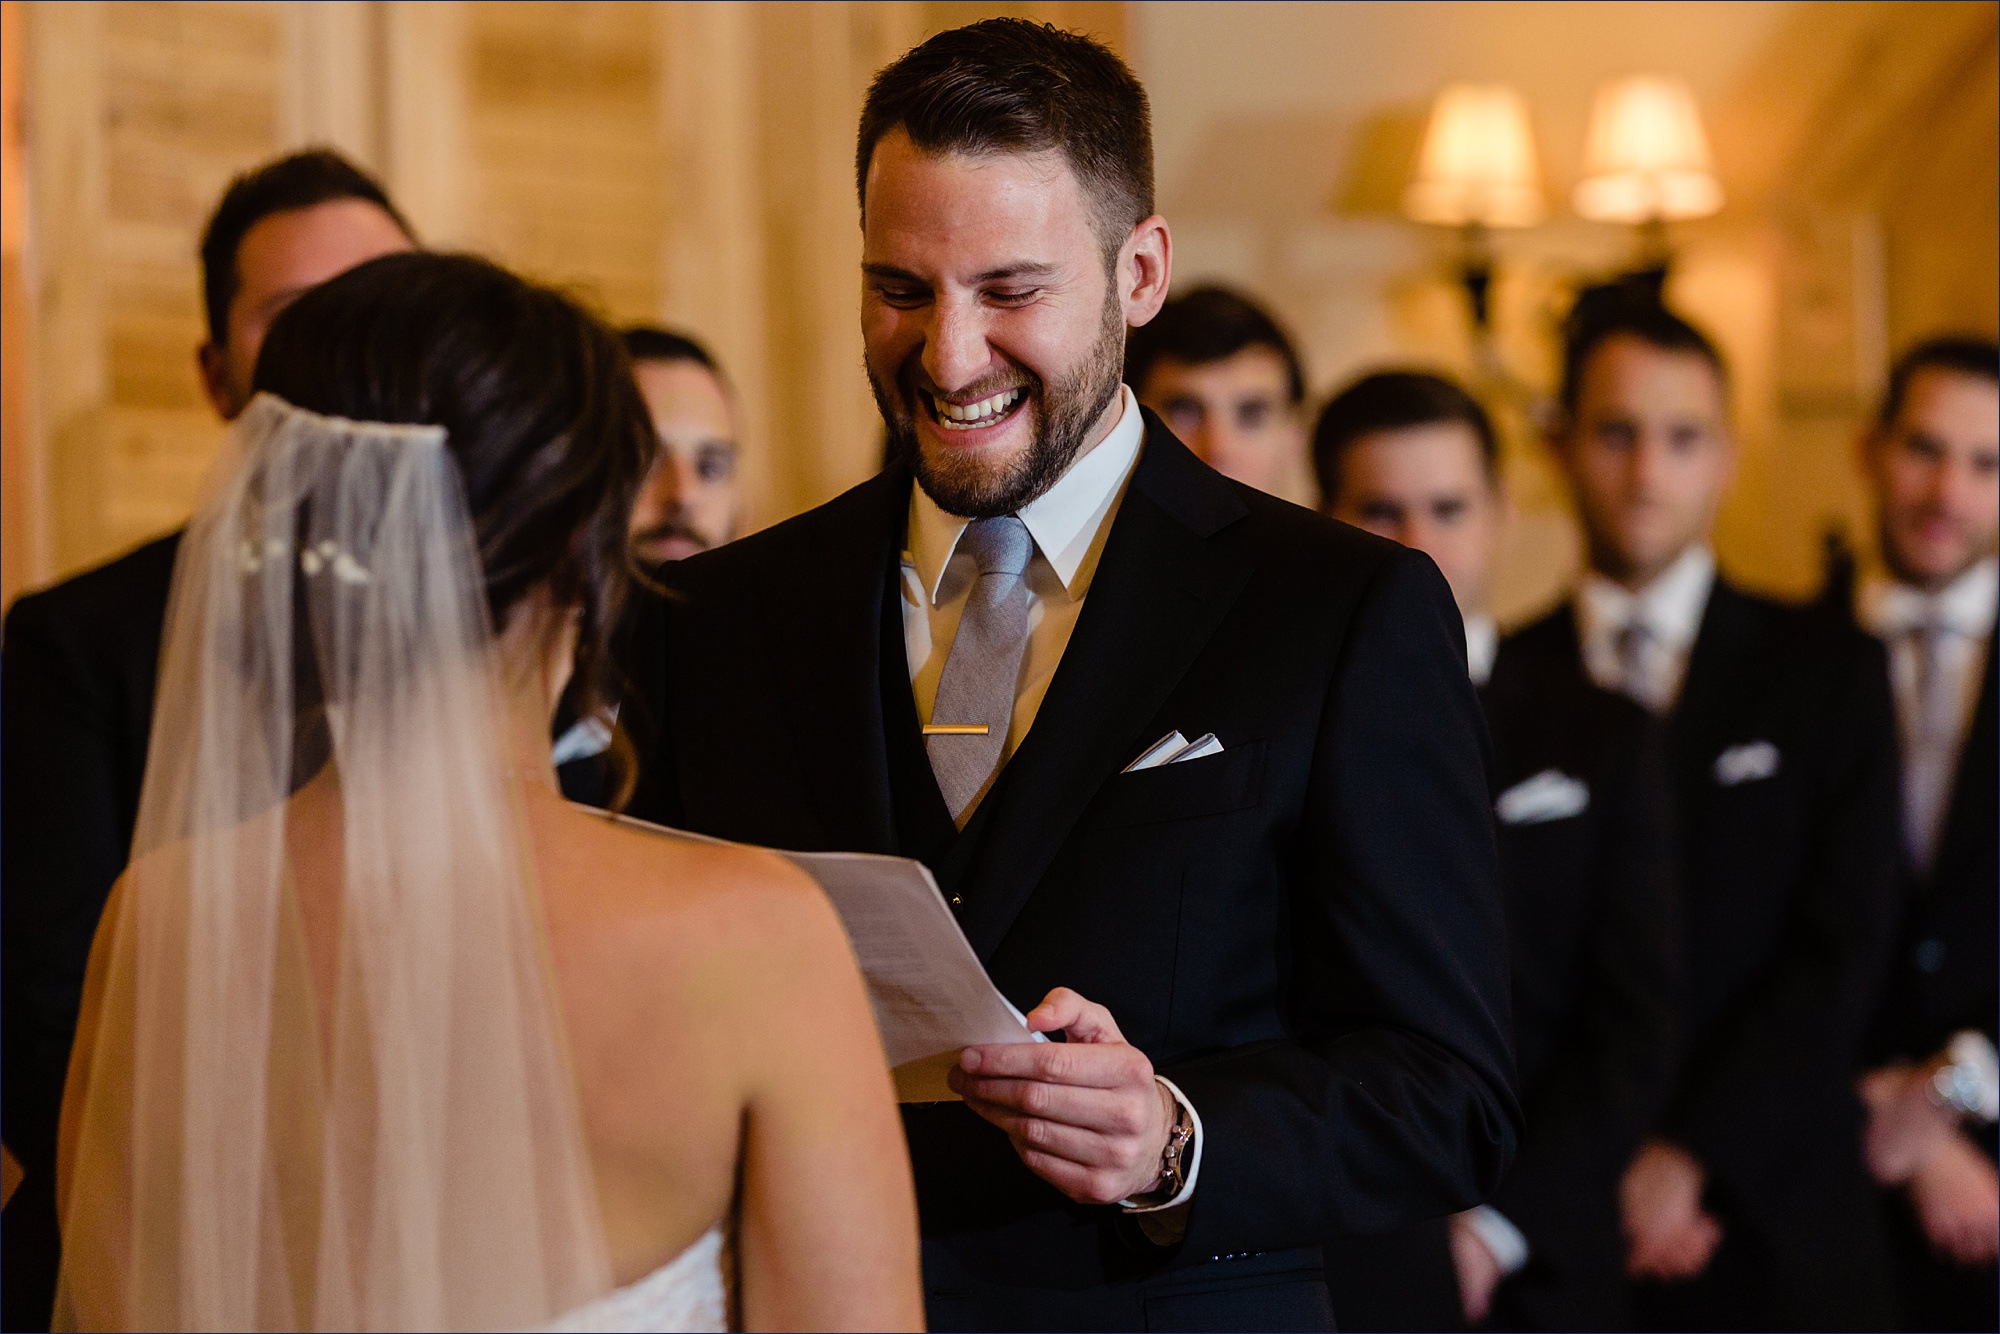 The groom laughs as he reads his vows to the bride at their wedding ceremony